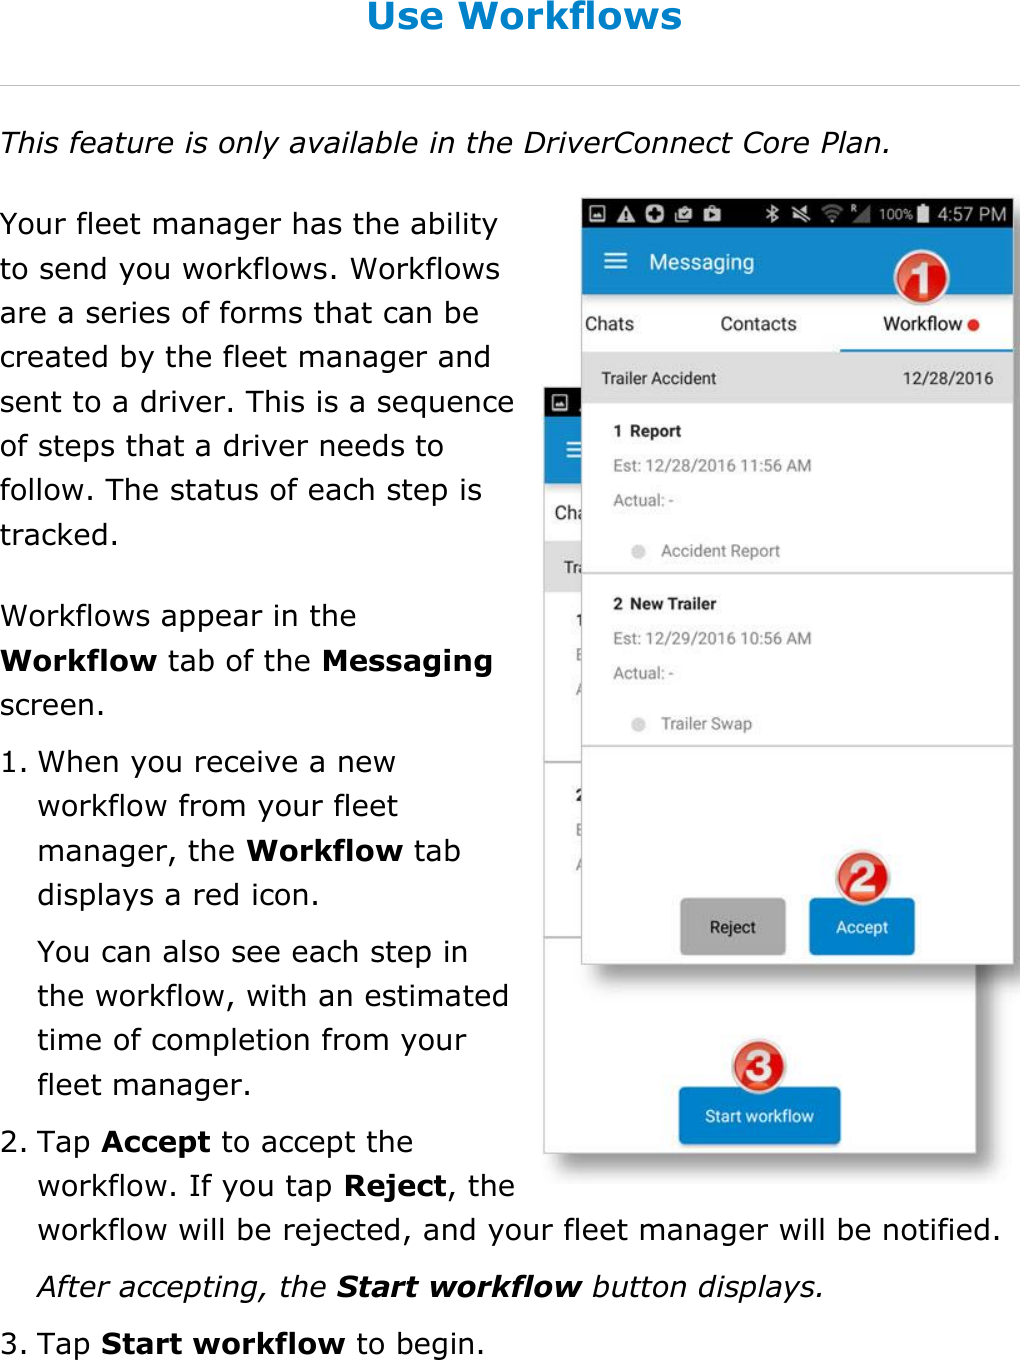 Send Messages, Forms, and Workflows DriverConnect User Guide  77 © 2016-2017, Rand McNally, Inc. Use Workflows This feature is only available in the DriverConnect Core Plan. Your fleet manager has the ability to send you workflows. Workflows are a series of forms that can be created by the fleet manager and sent to a driver. This is a sequence of steps that a driver needs to follow. The status of each step is tracked. Workflows appear in the Workflow tab of the Messaging screen. 1. When you receive a new workflow from your fleet manager, the Workflow tab displays a red icon. You can also see each step in the workflow, with an estimated time of completion from your fleet manager. 2. Tap Accept to accept the workflow. If you tap Reject, the workflow will be rejected, and your fleet manager will be notified. After accepting, the Start workflow button displays. 3. Tap Start workflow to begin.   